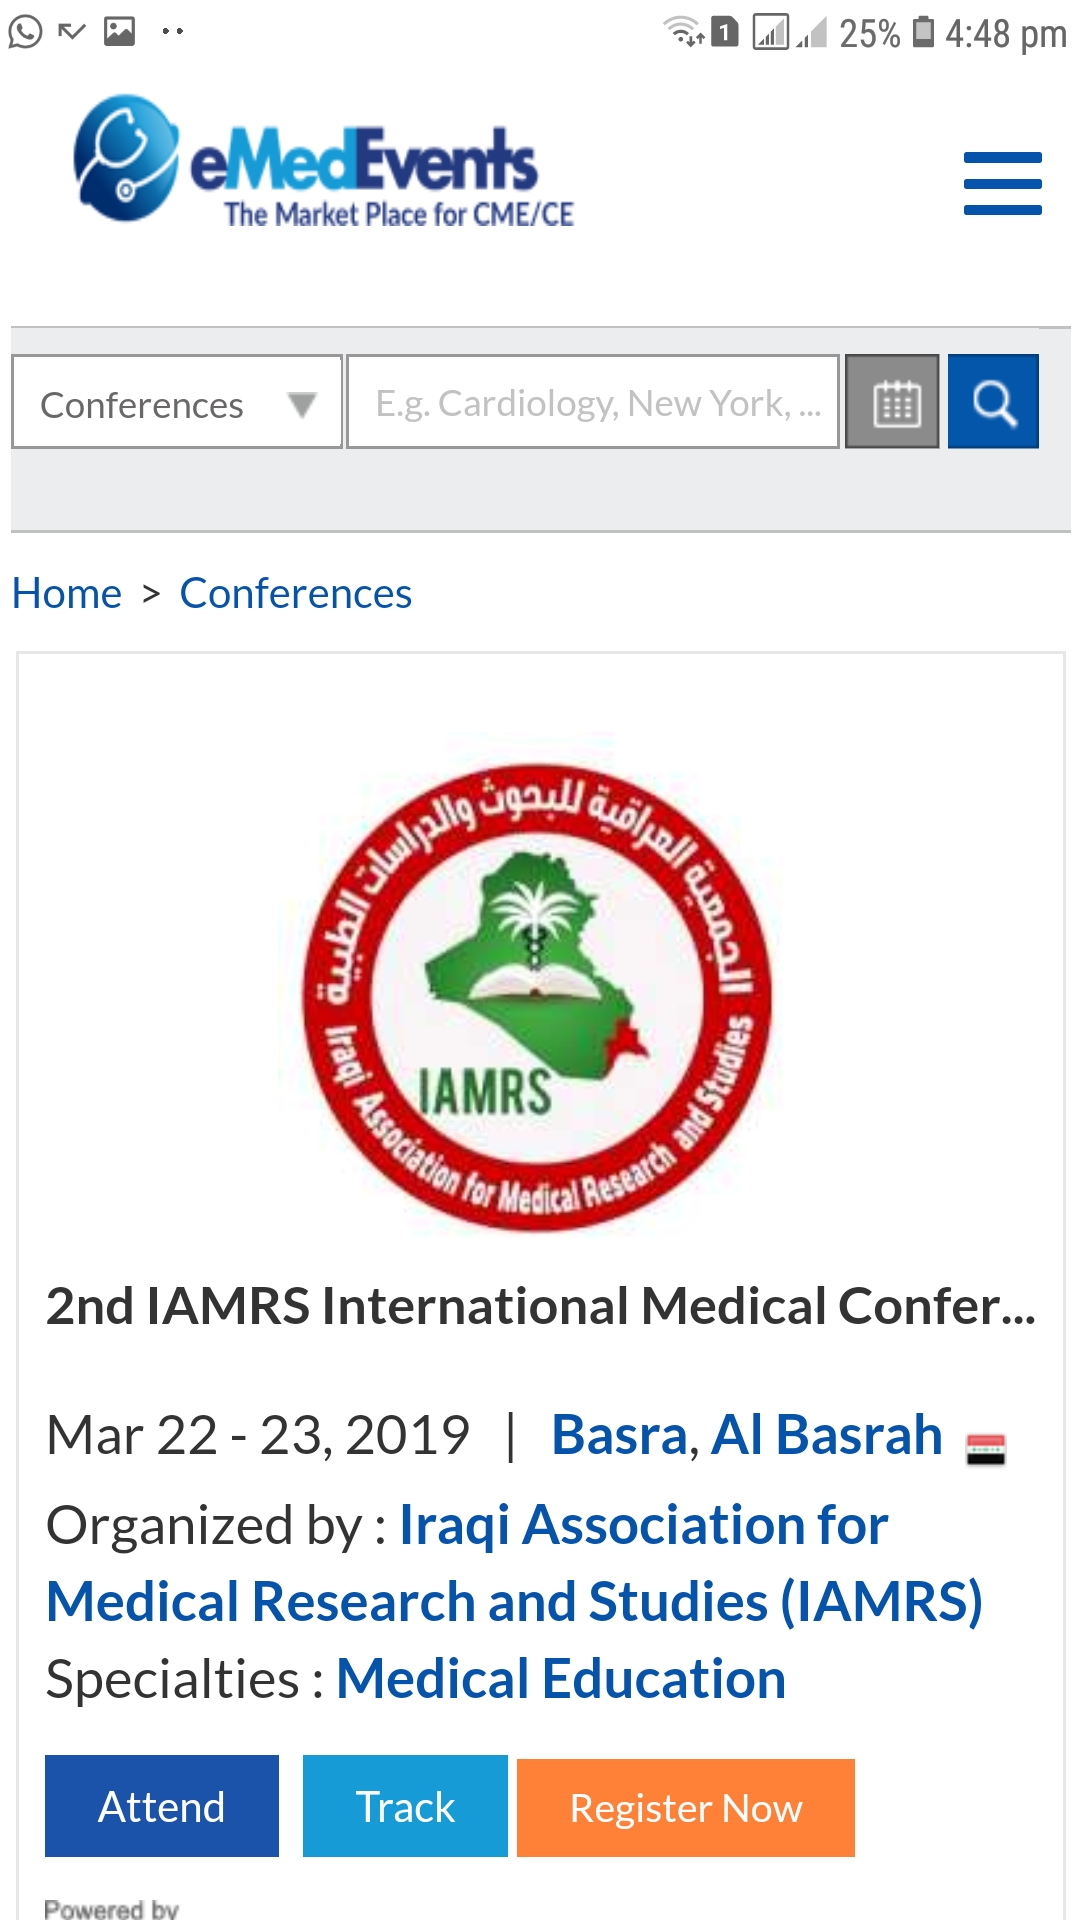 2nd IAMRS Conference on eMedEvent list